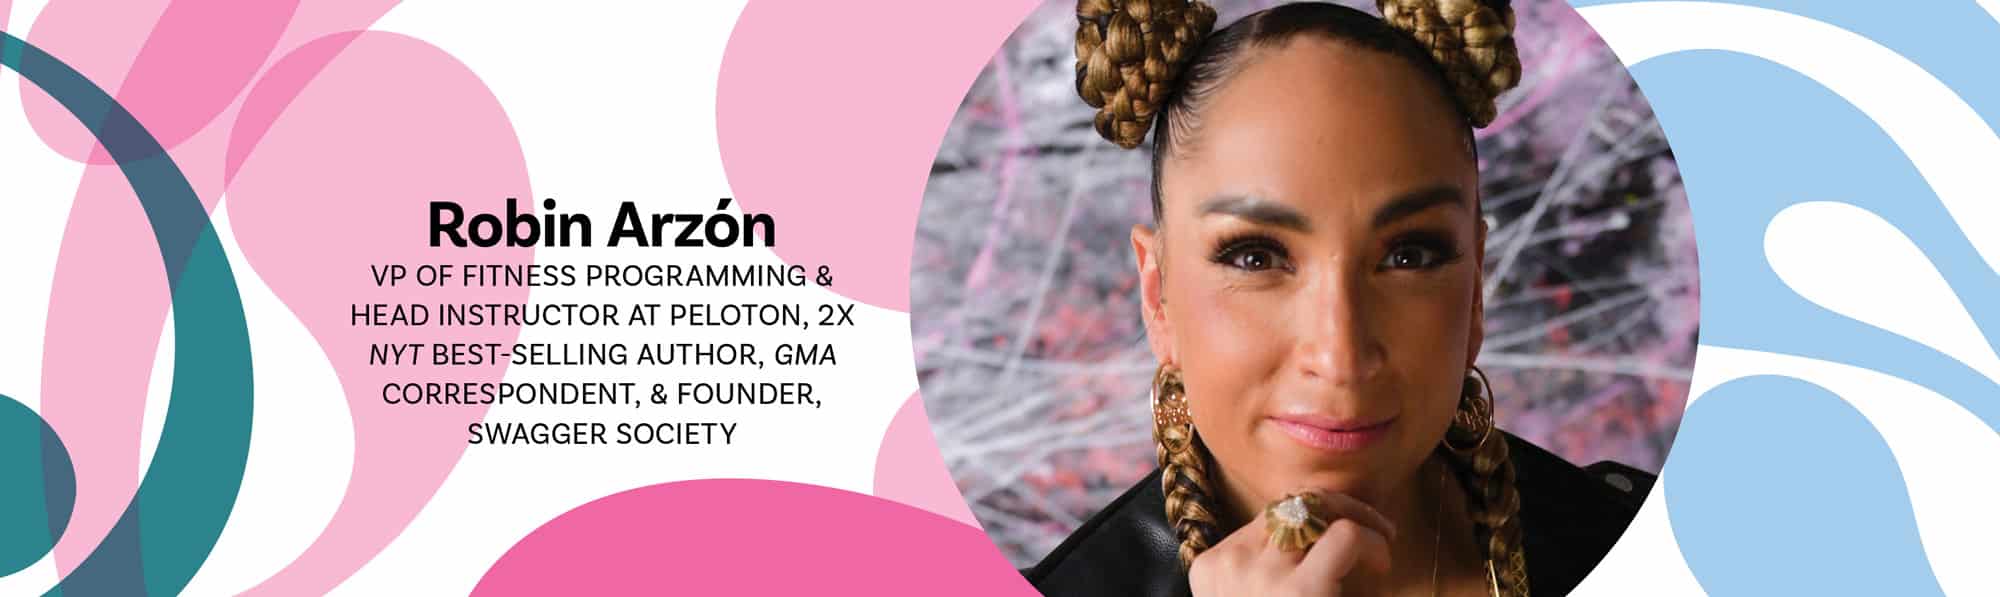 Join Robin Arzón at the Pennsylvania Conference for Women on November 7th in Philadelphia, PA!